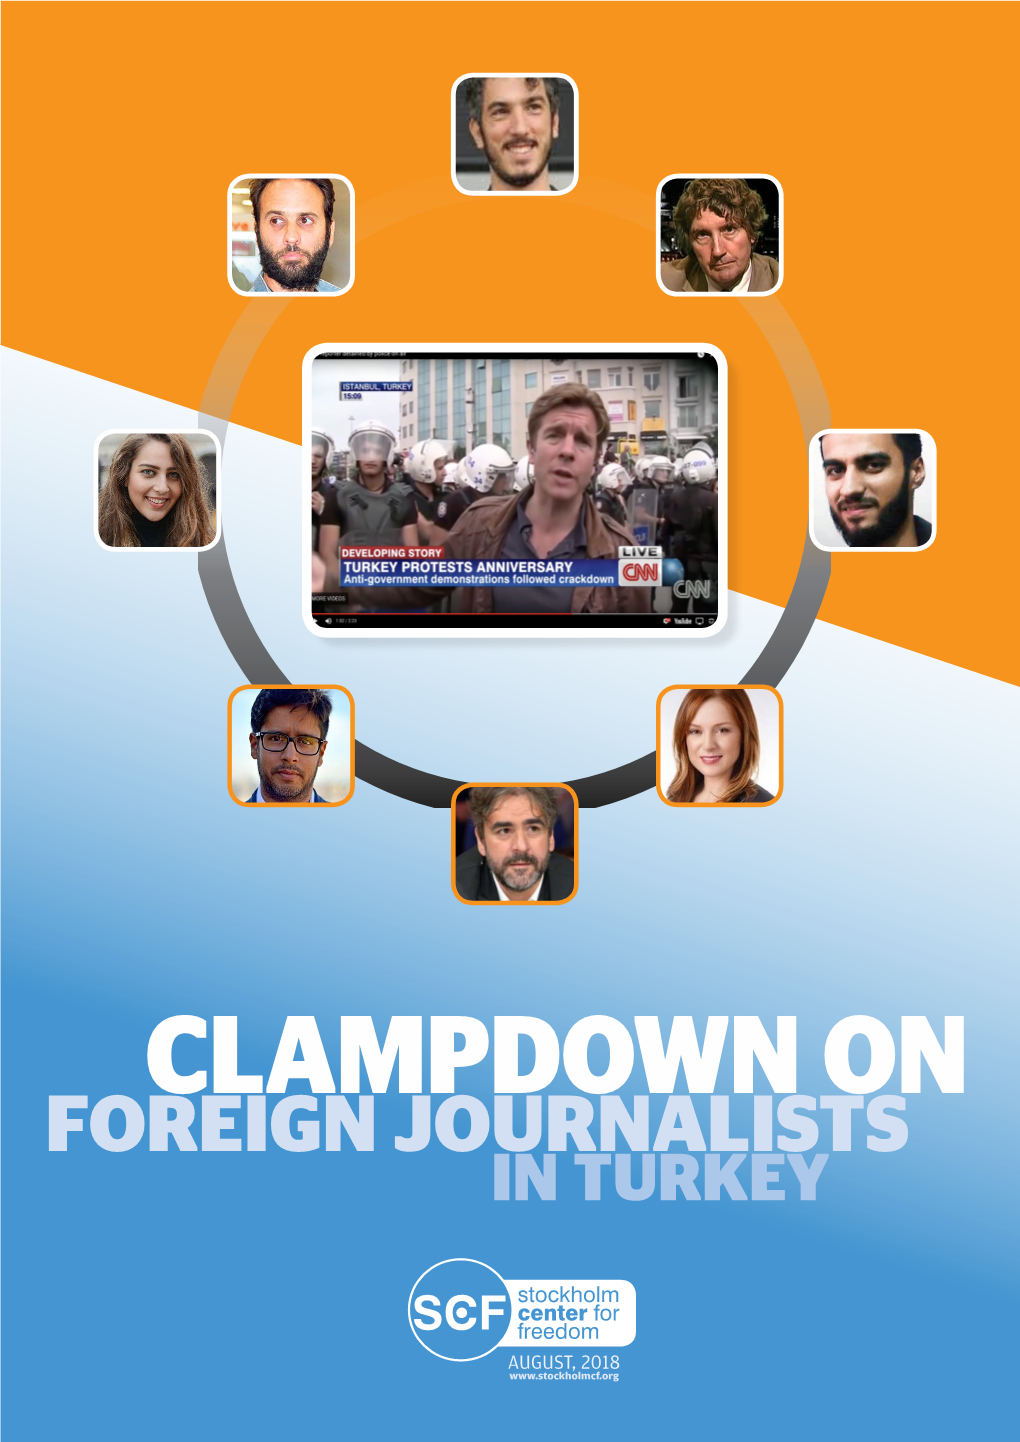 The Clampdown on Foreign Journalists in Turkey